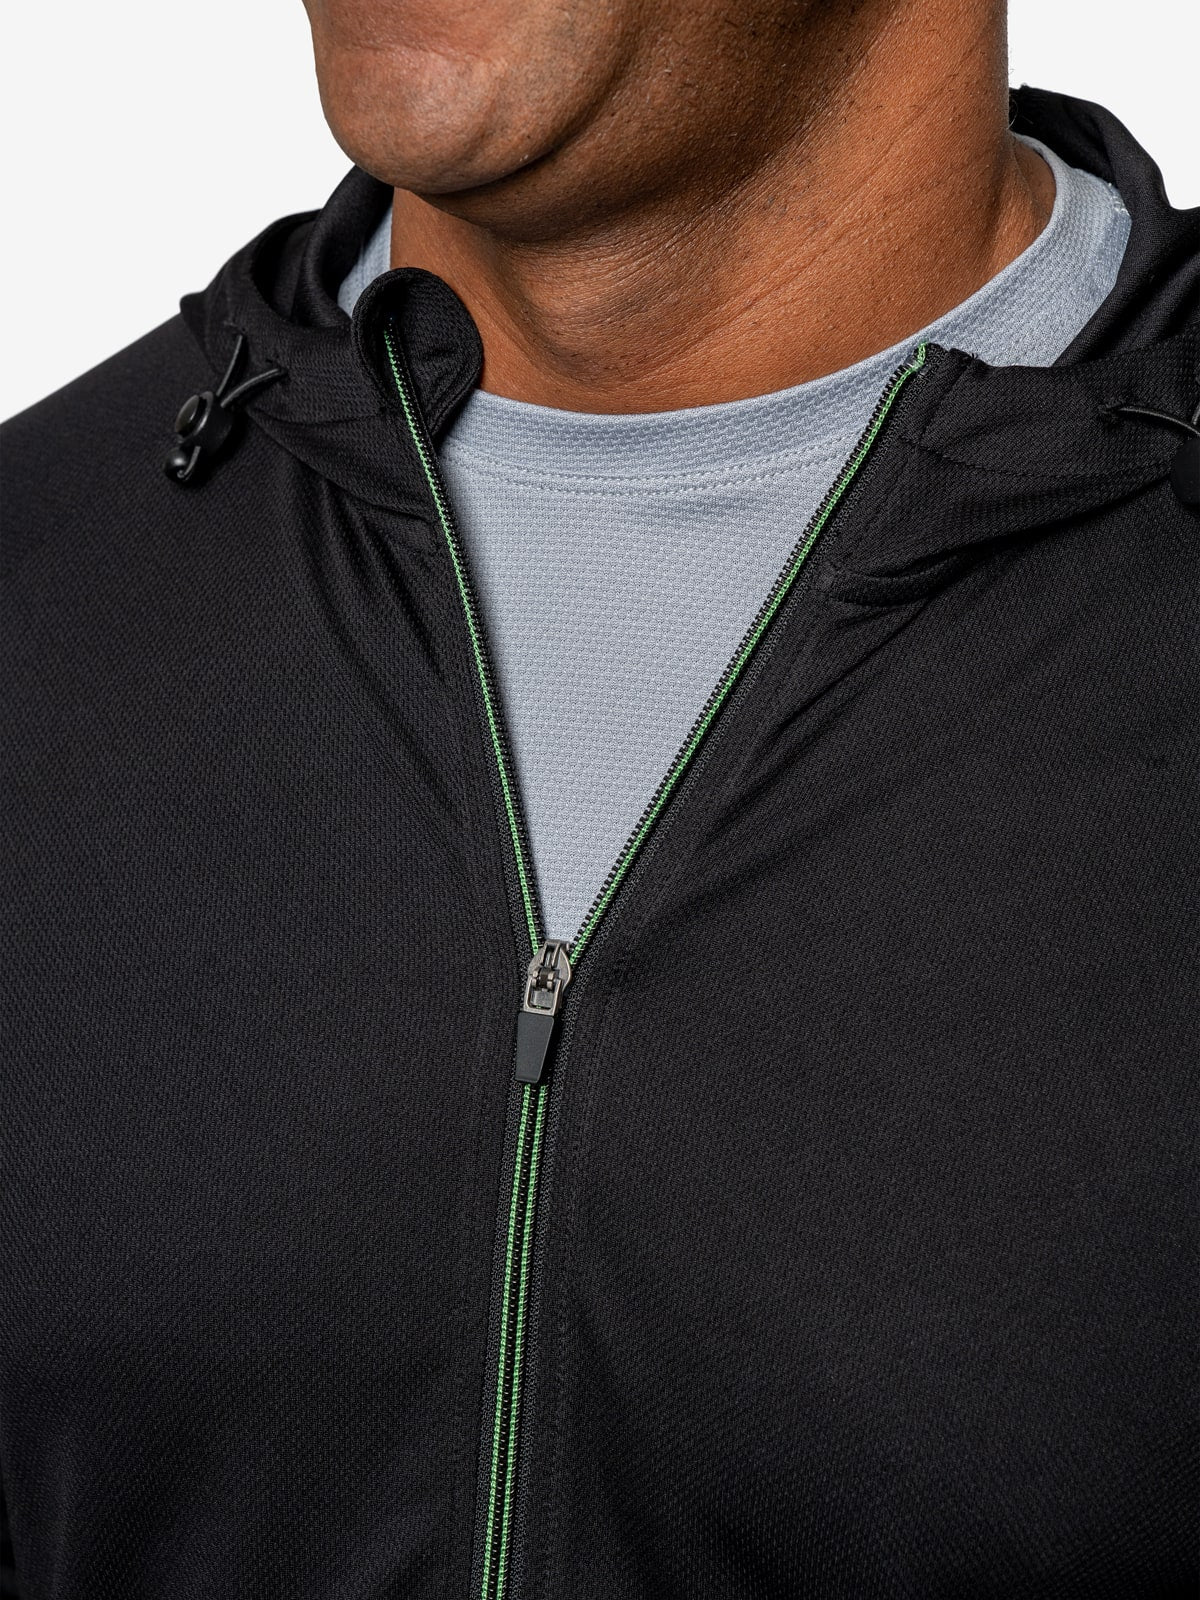 Insect Shield Men's Sport Mesh Hoodie